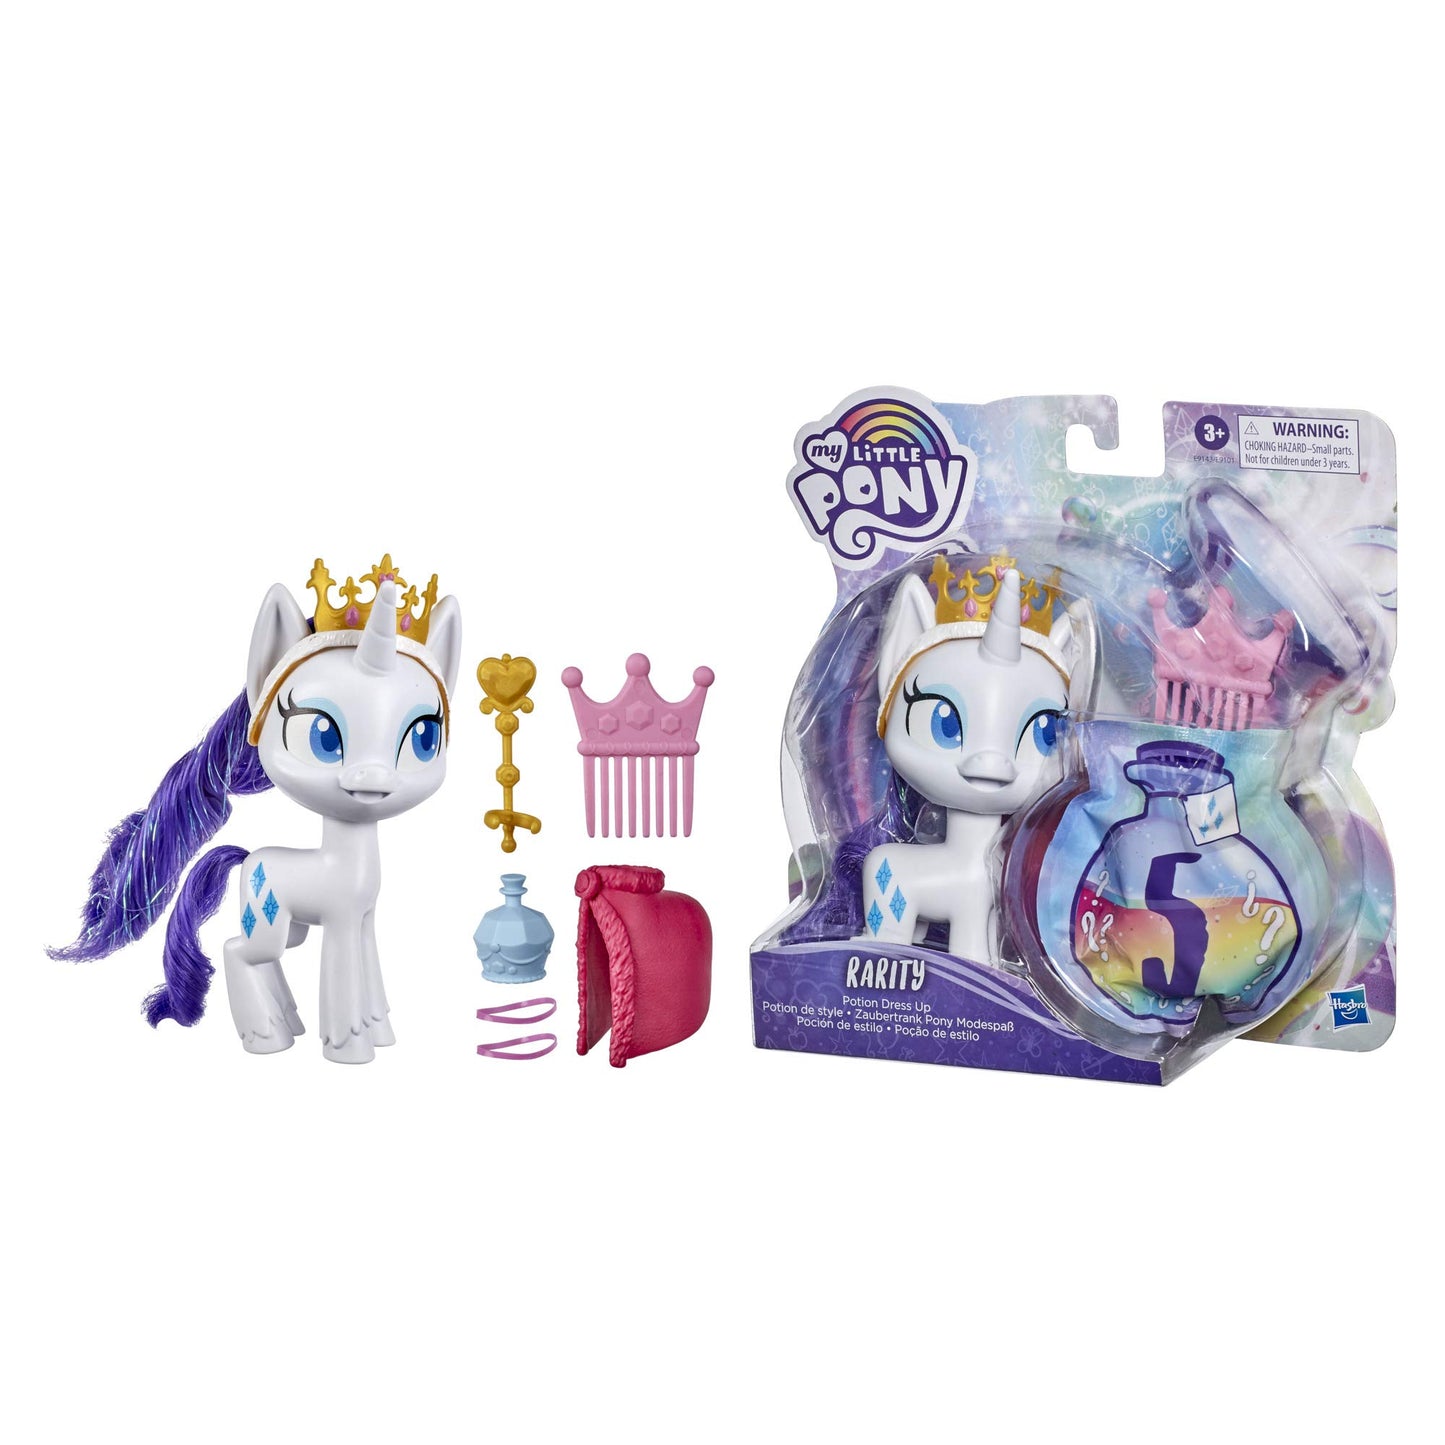 My Little Pony Rarity Potion Dress Up Figure -- 5-Inch White Pony Toy with Dress-Up Fashion Accessories, Brushable Hair and Comb